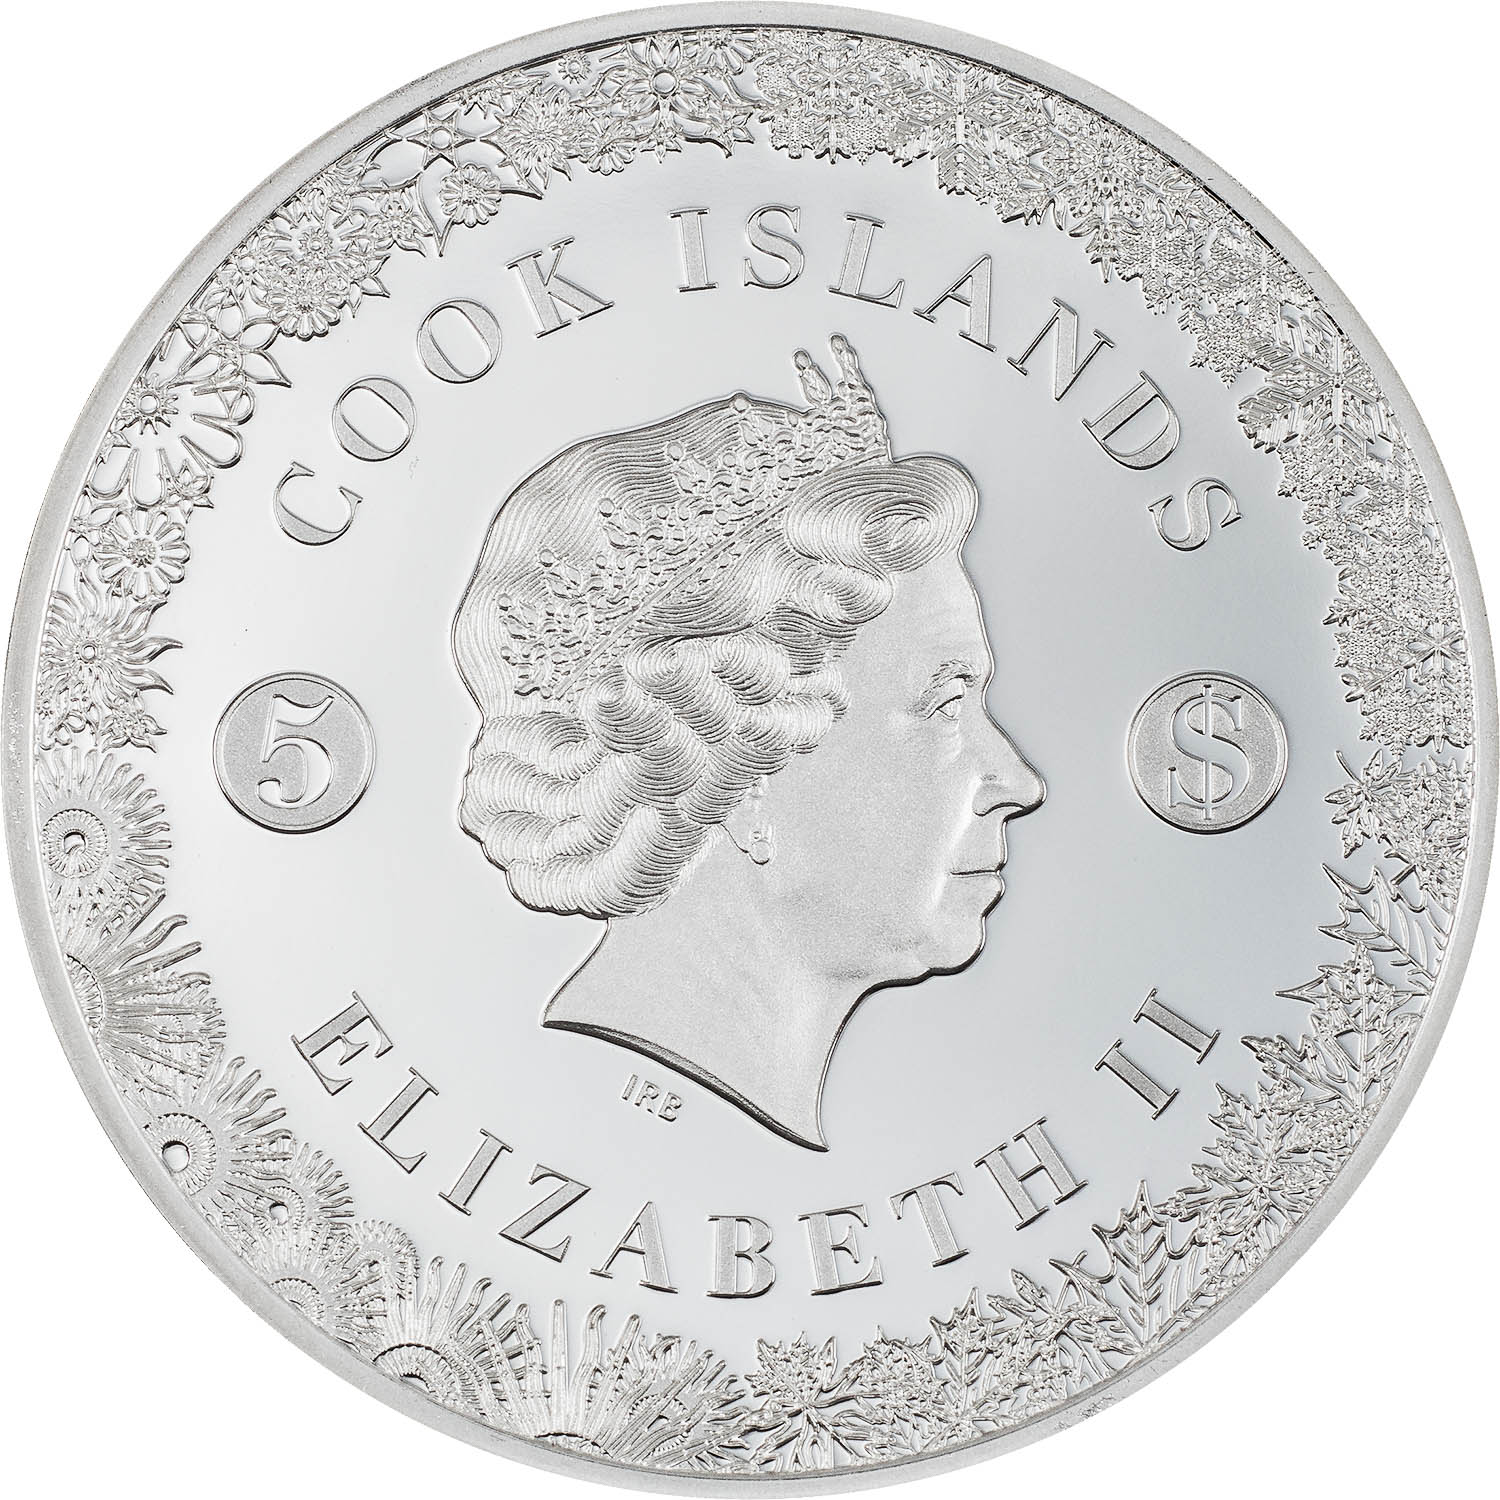 Cook Islands 2022 Summer Four Seasons Pure Silver Proof Coin Manga Series